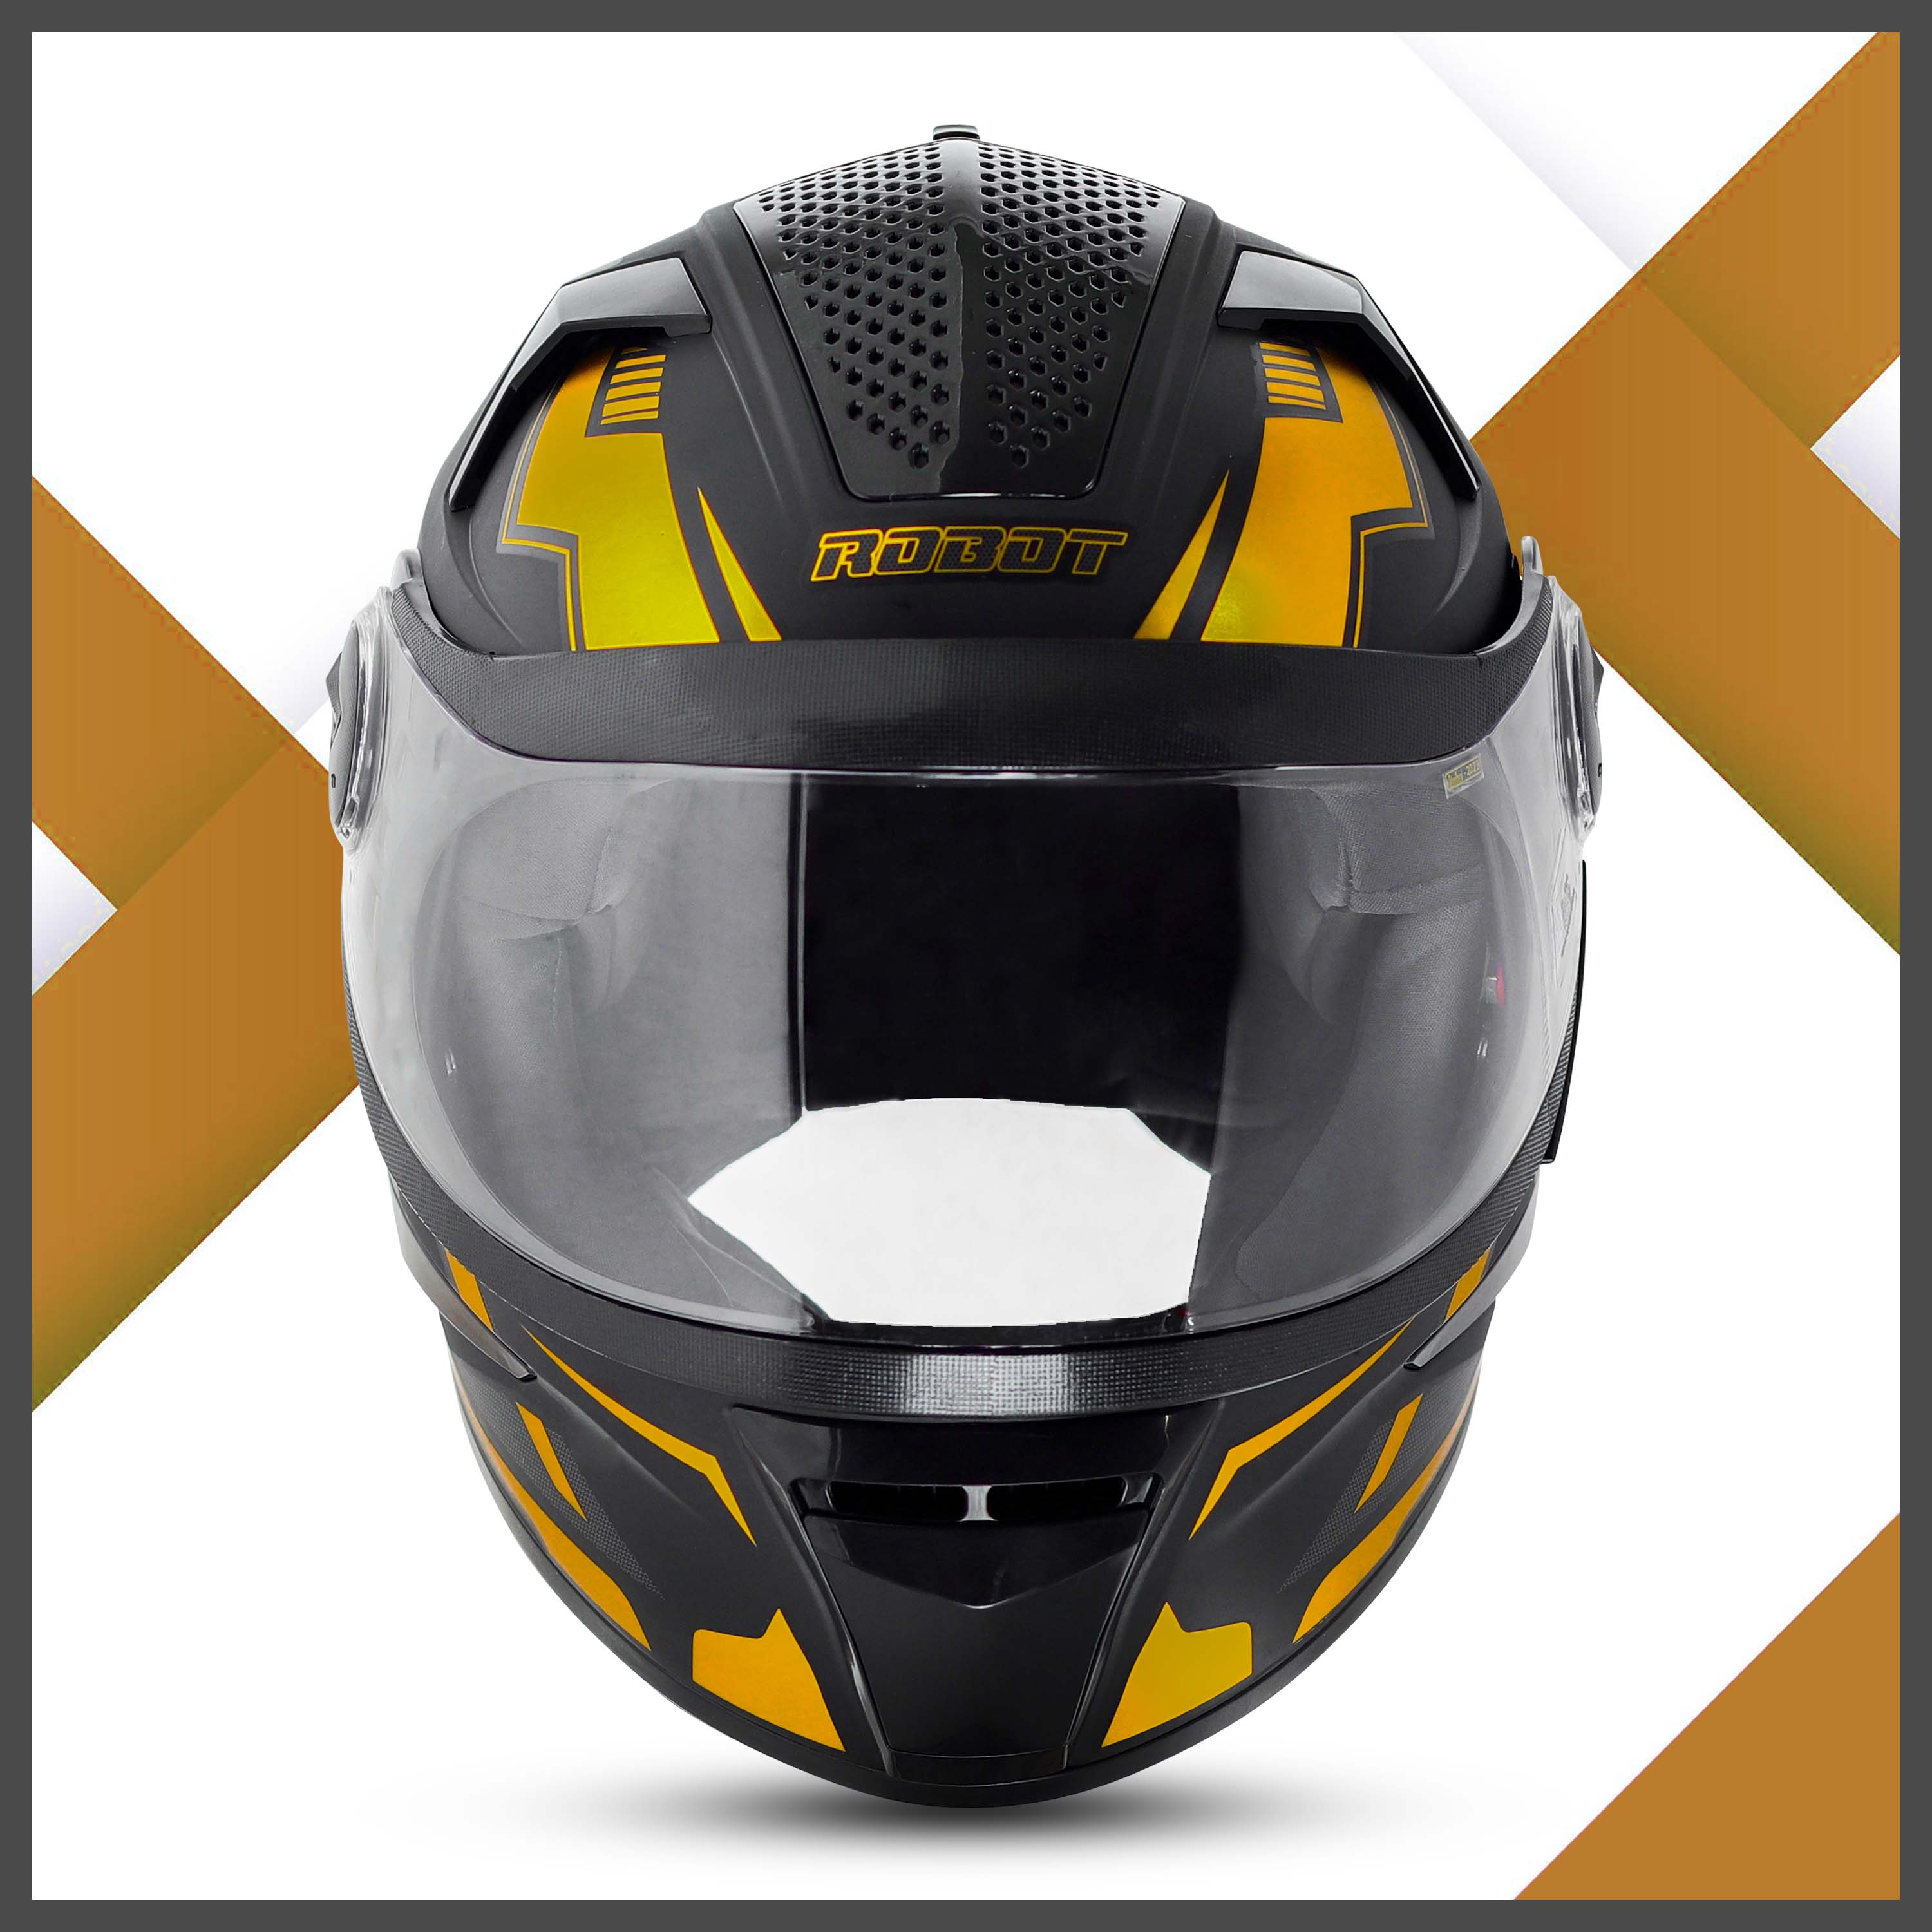 Steelbird SBH-17 Robot Terminator ISI Certified Full Face Chrome Graphic Helmet For Men And Women (Glossy Black Gold With Smoke Visor)